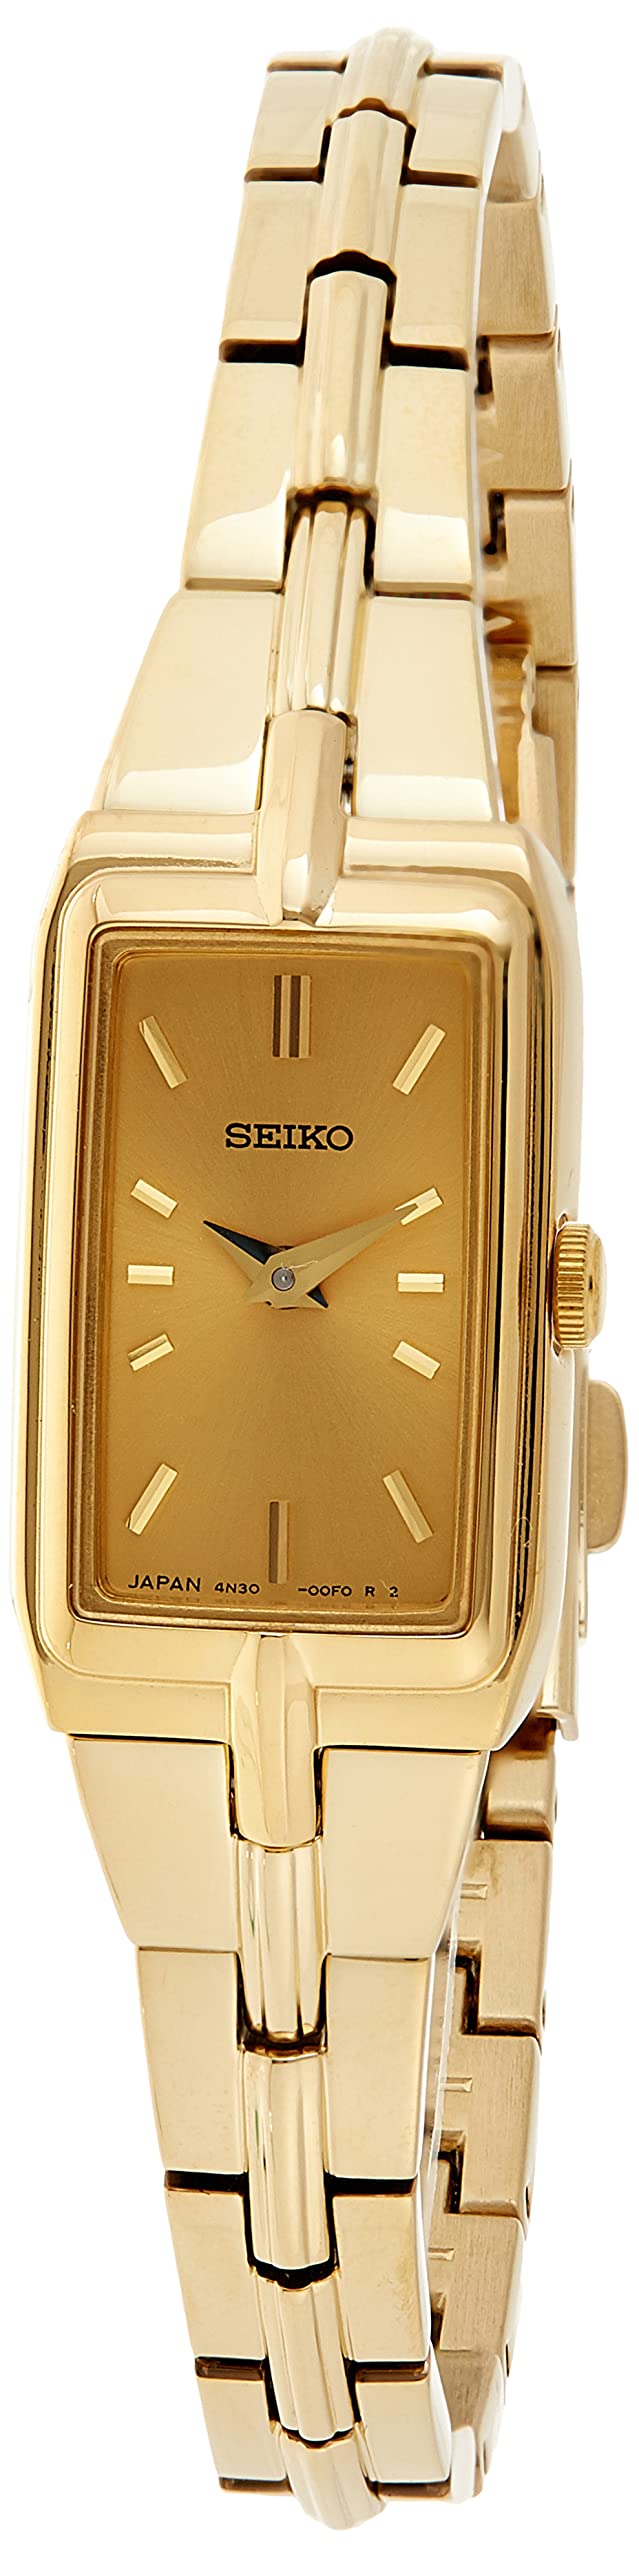 SEIKO SWR048 Watch for Women - Essentials Collection - Stainless Steel Case and Bracelet, Champagne Dial